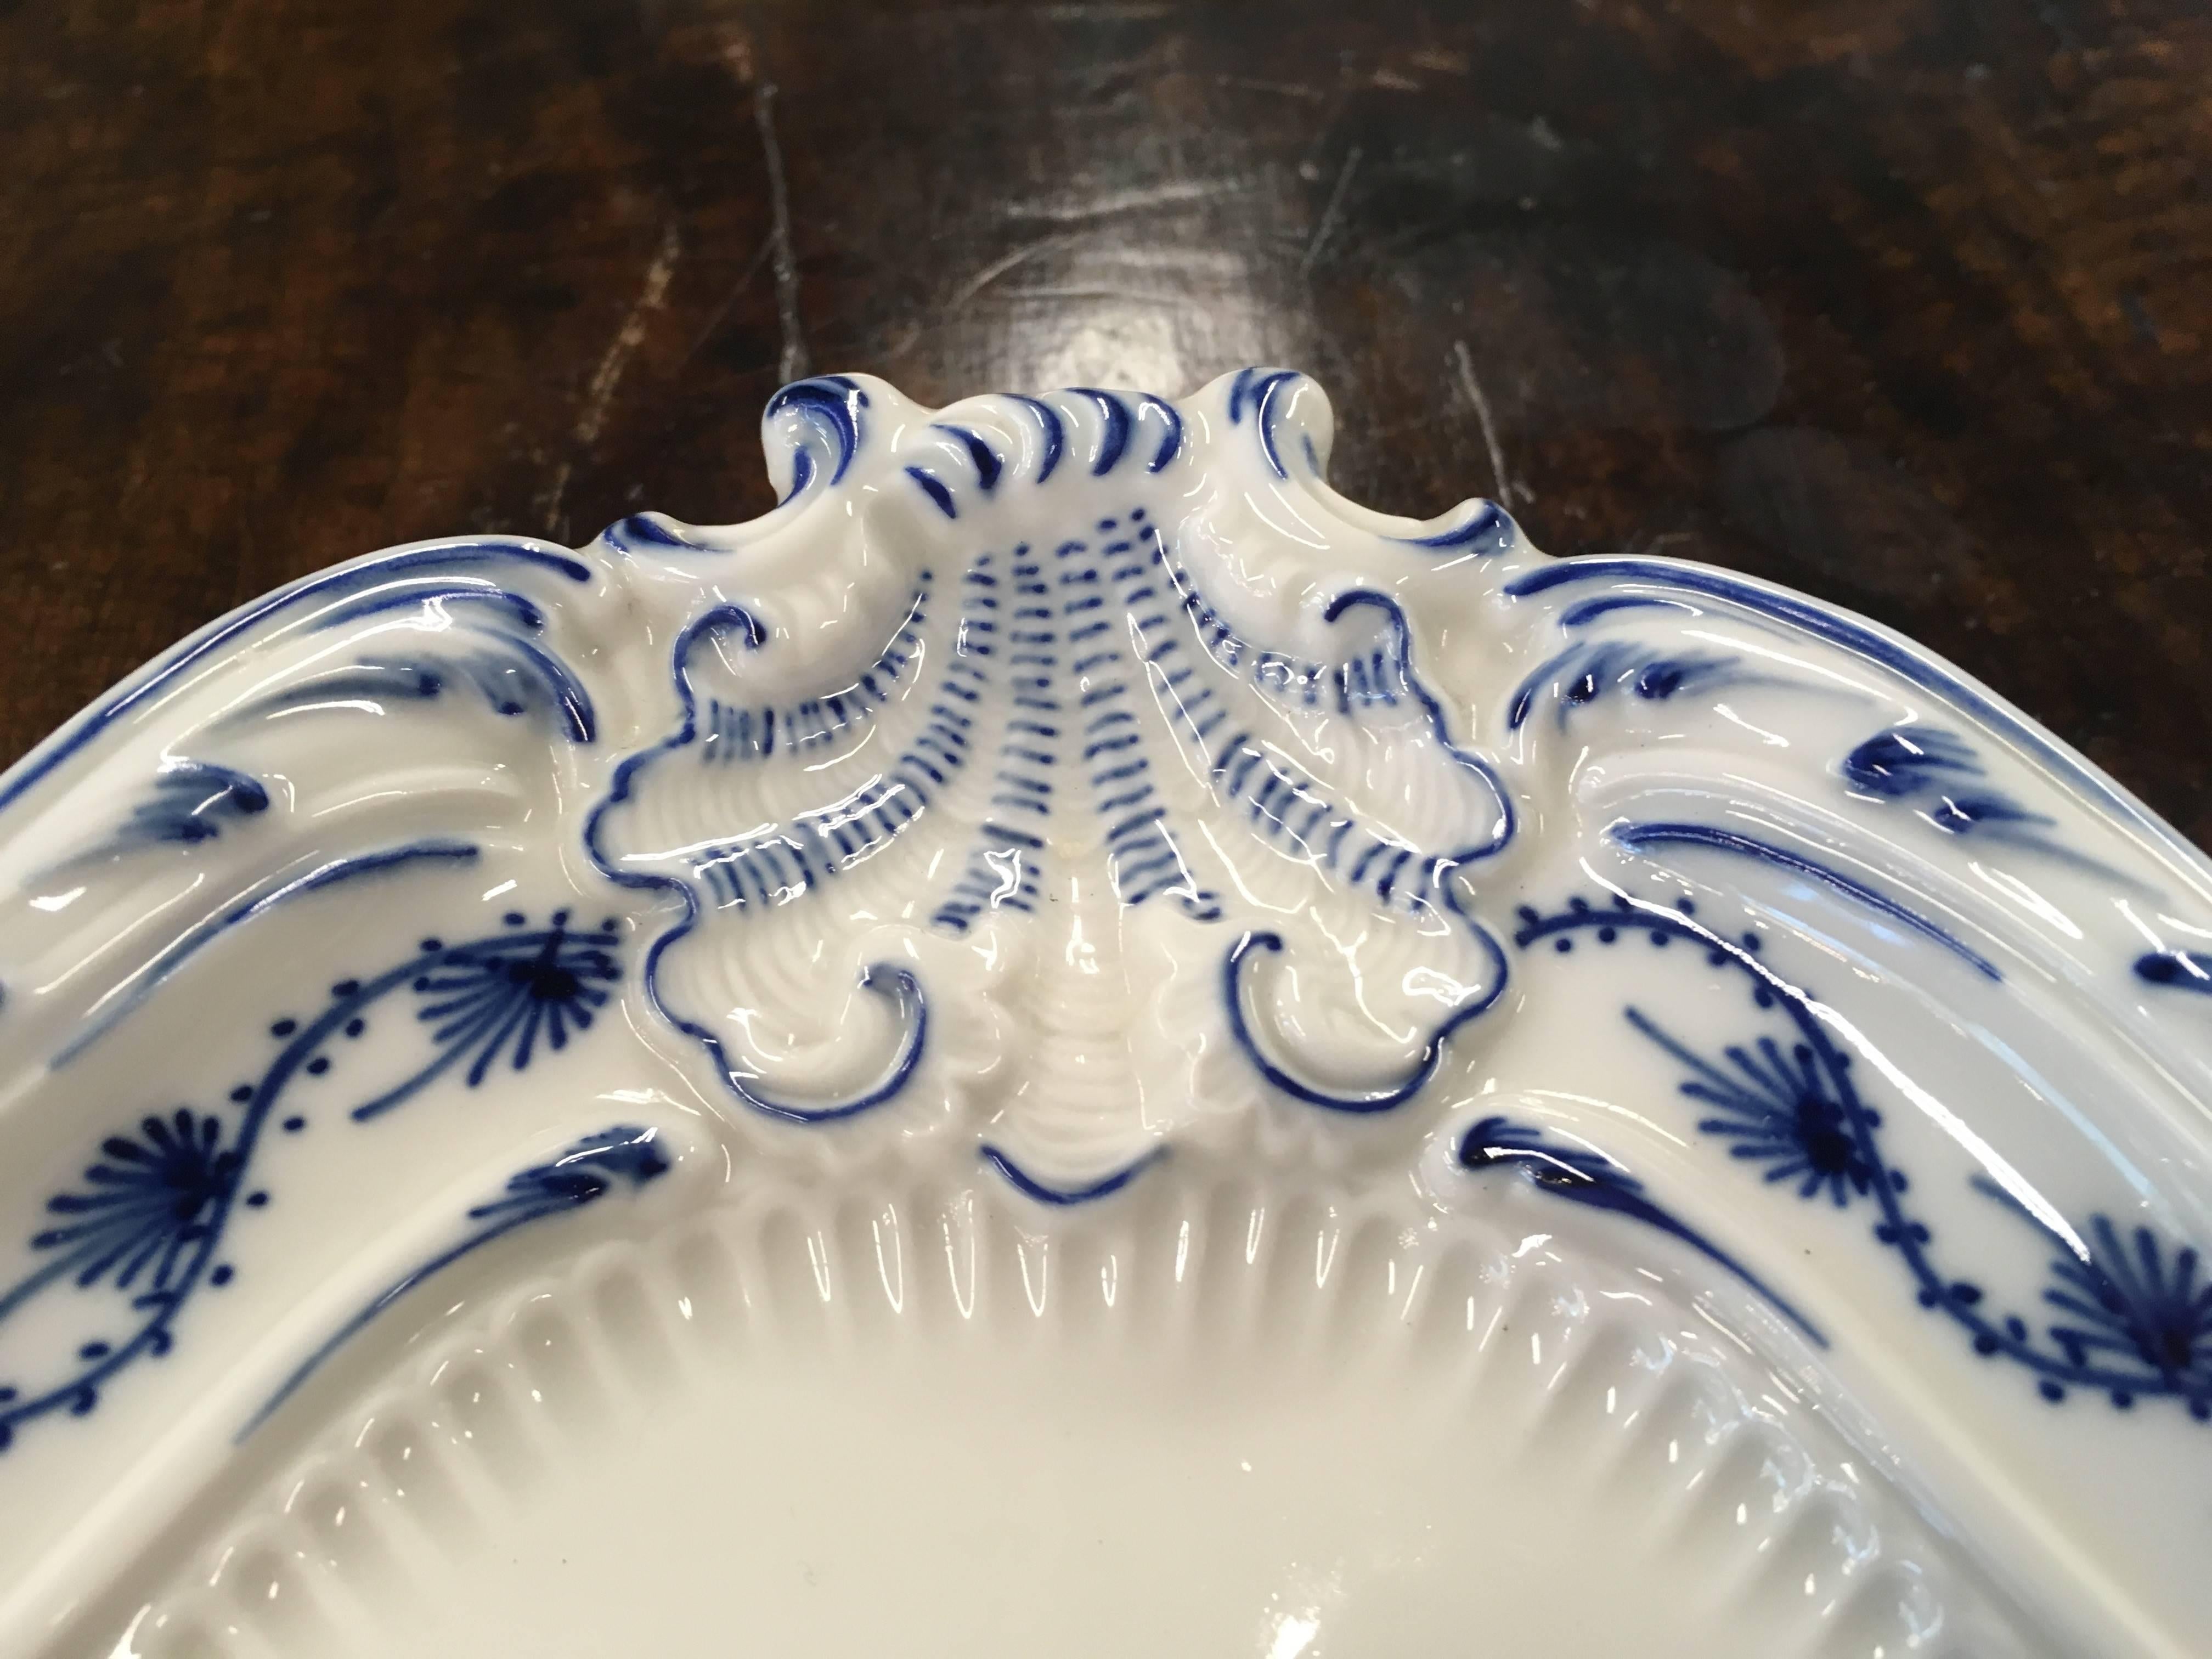 Meissen Square Porcelain Serving Platter In Good Condition For Sale In Farmers Branch, TX